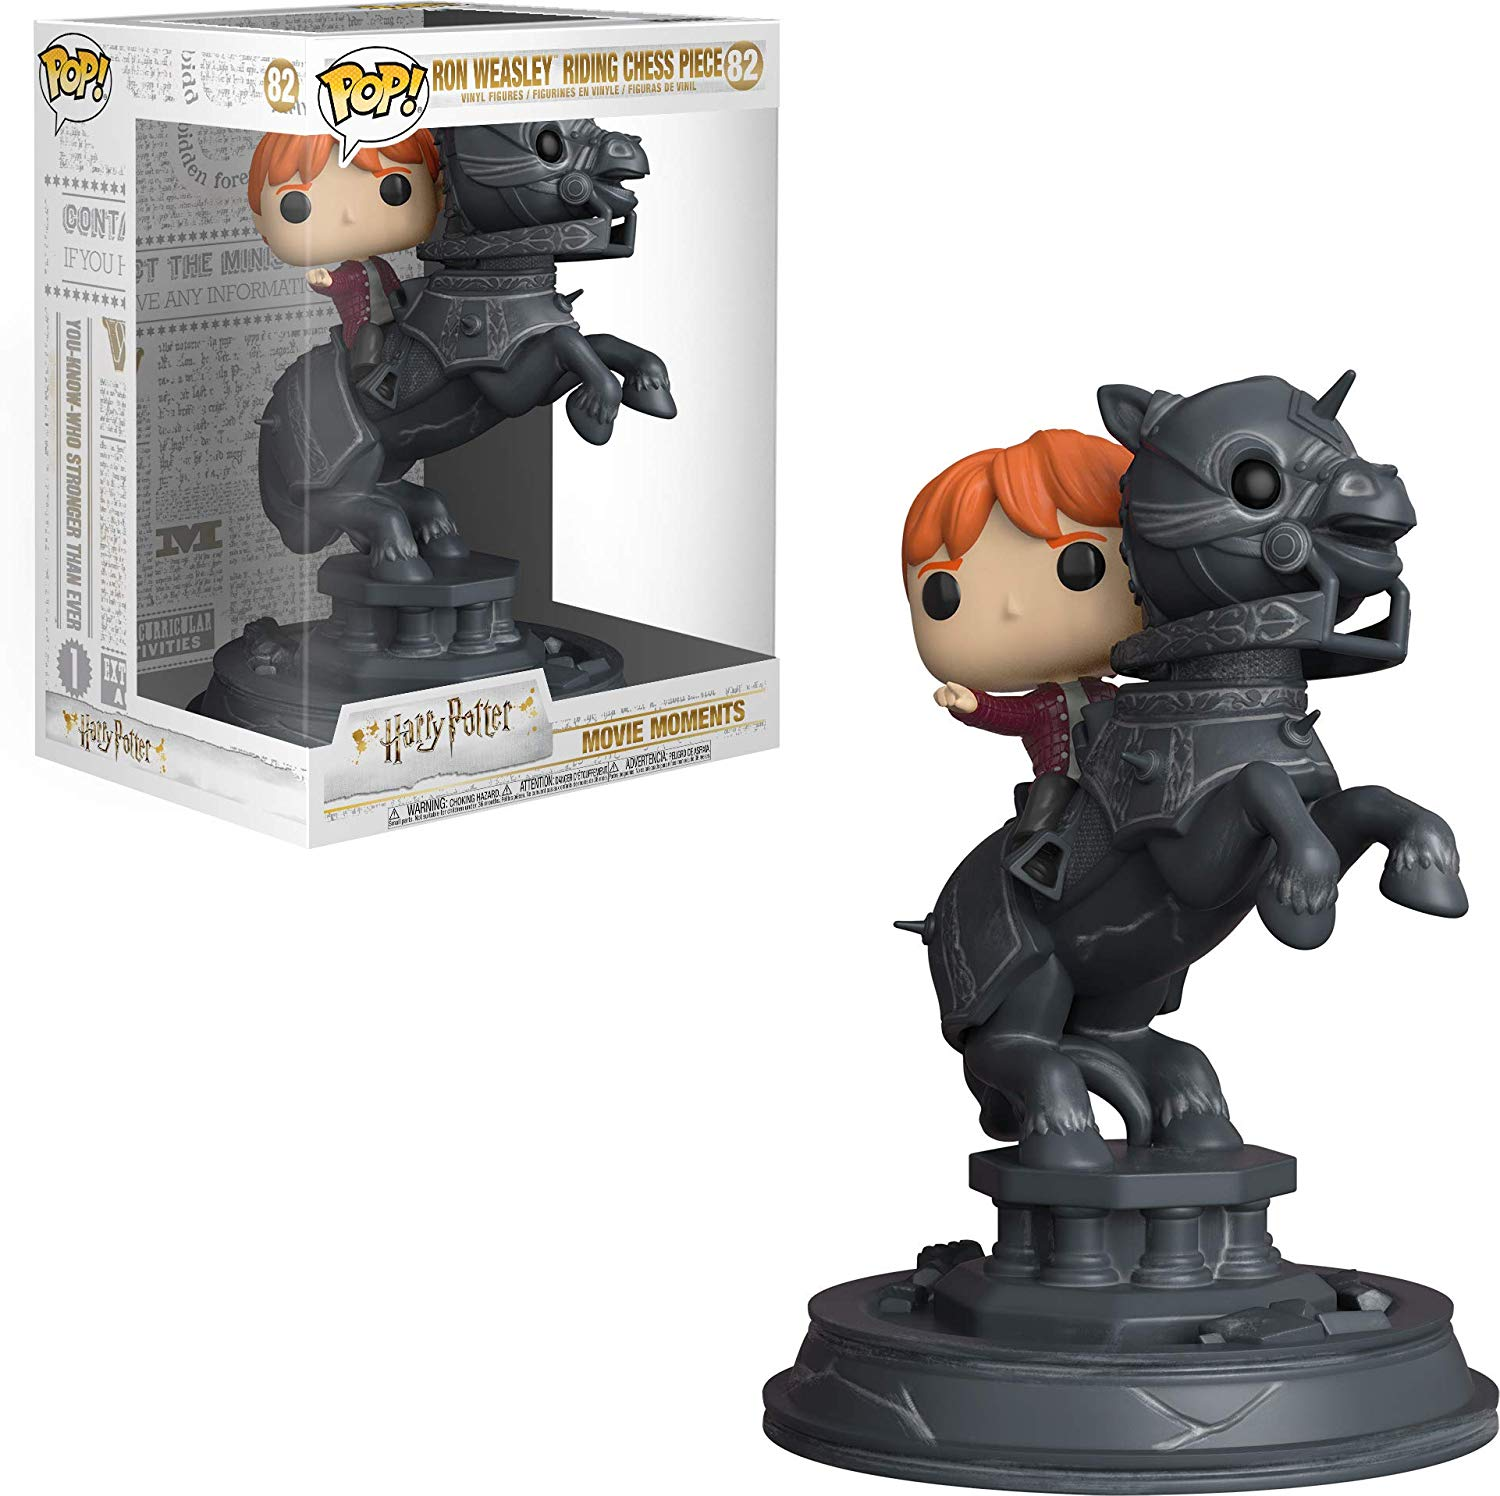 POP Movie Piece Riding - Chess Moments Weasley Ron